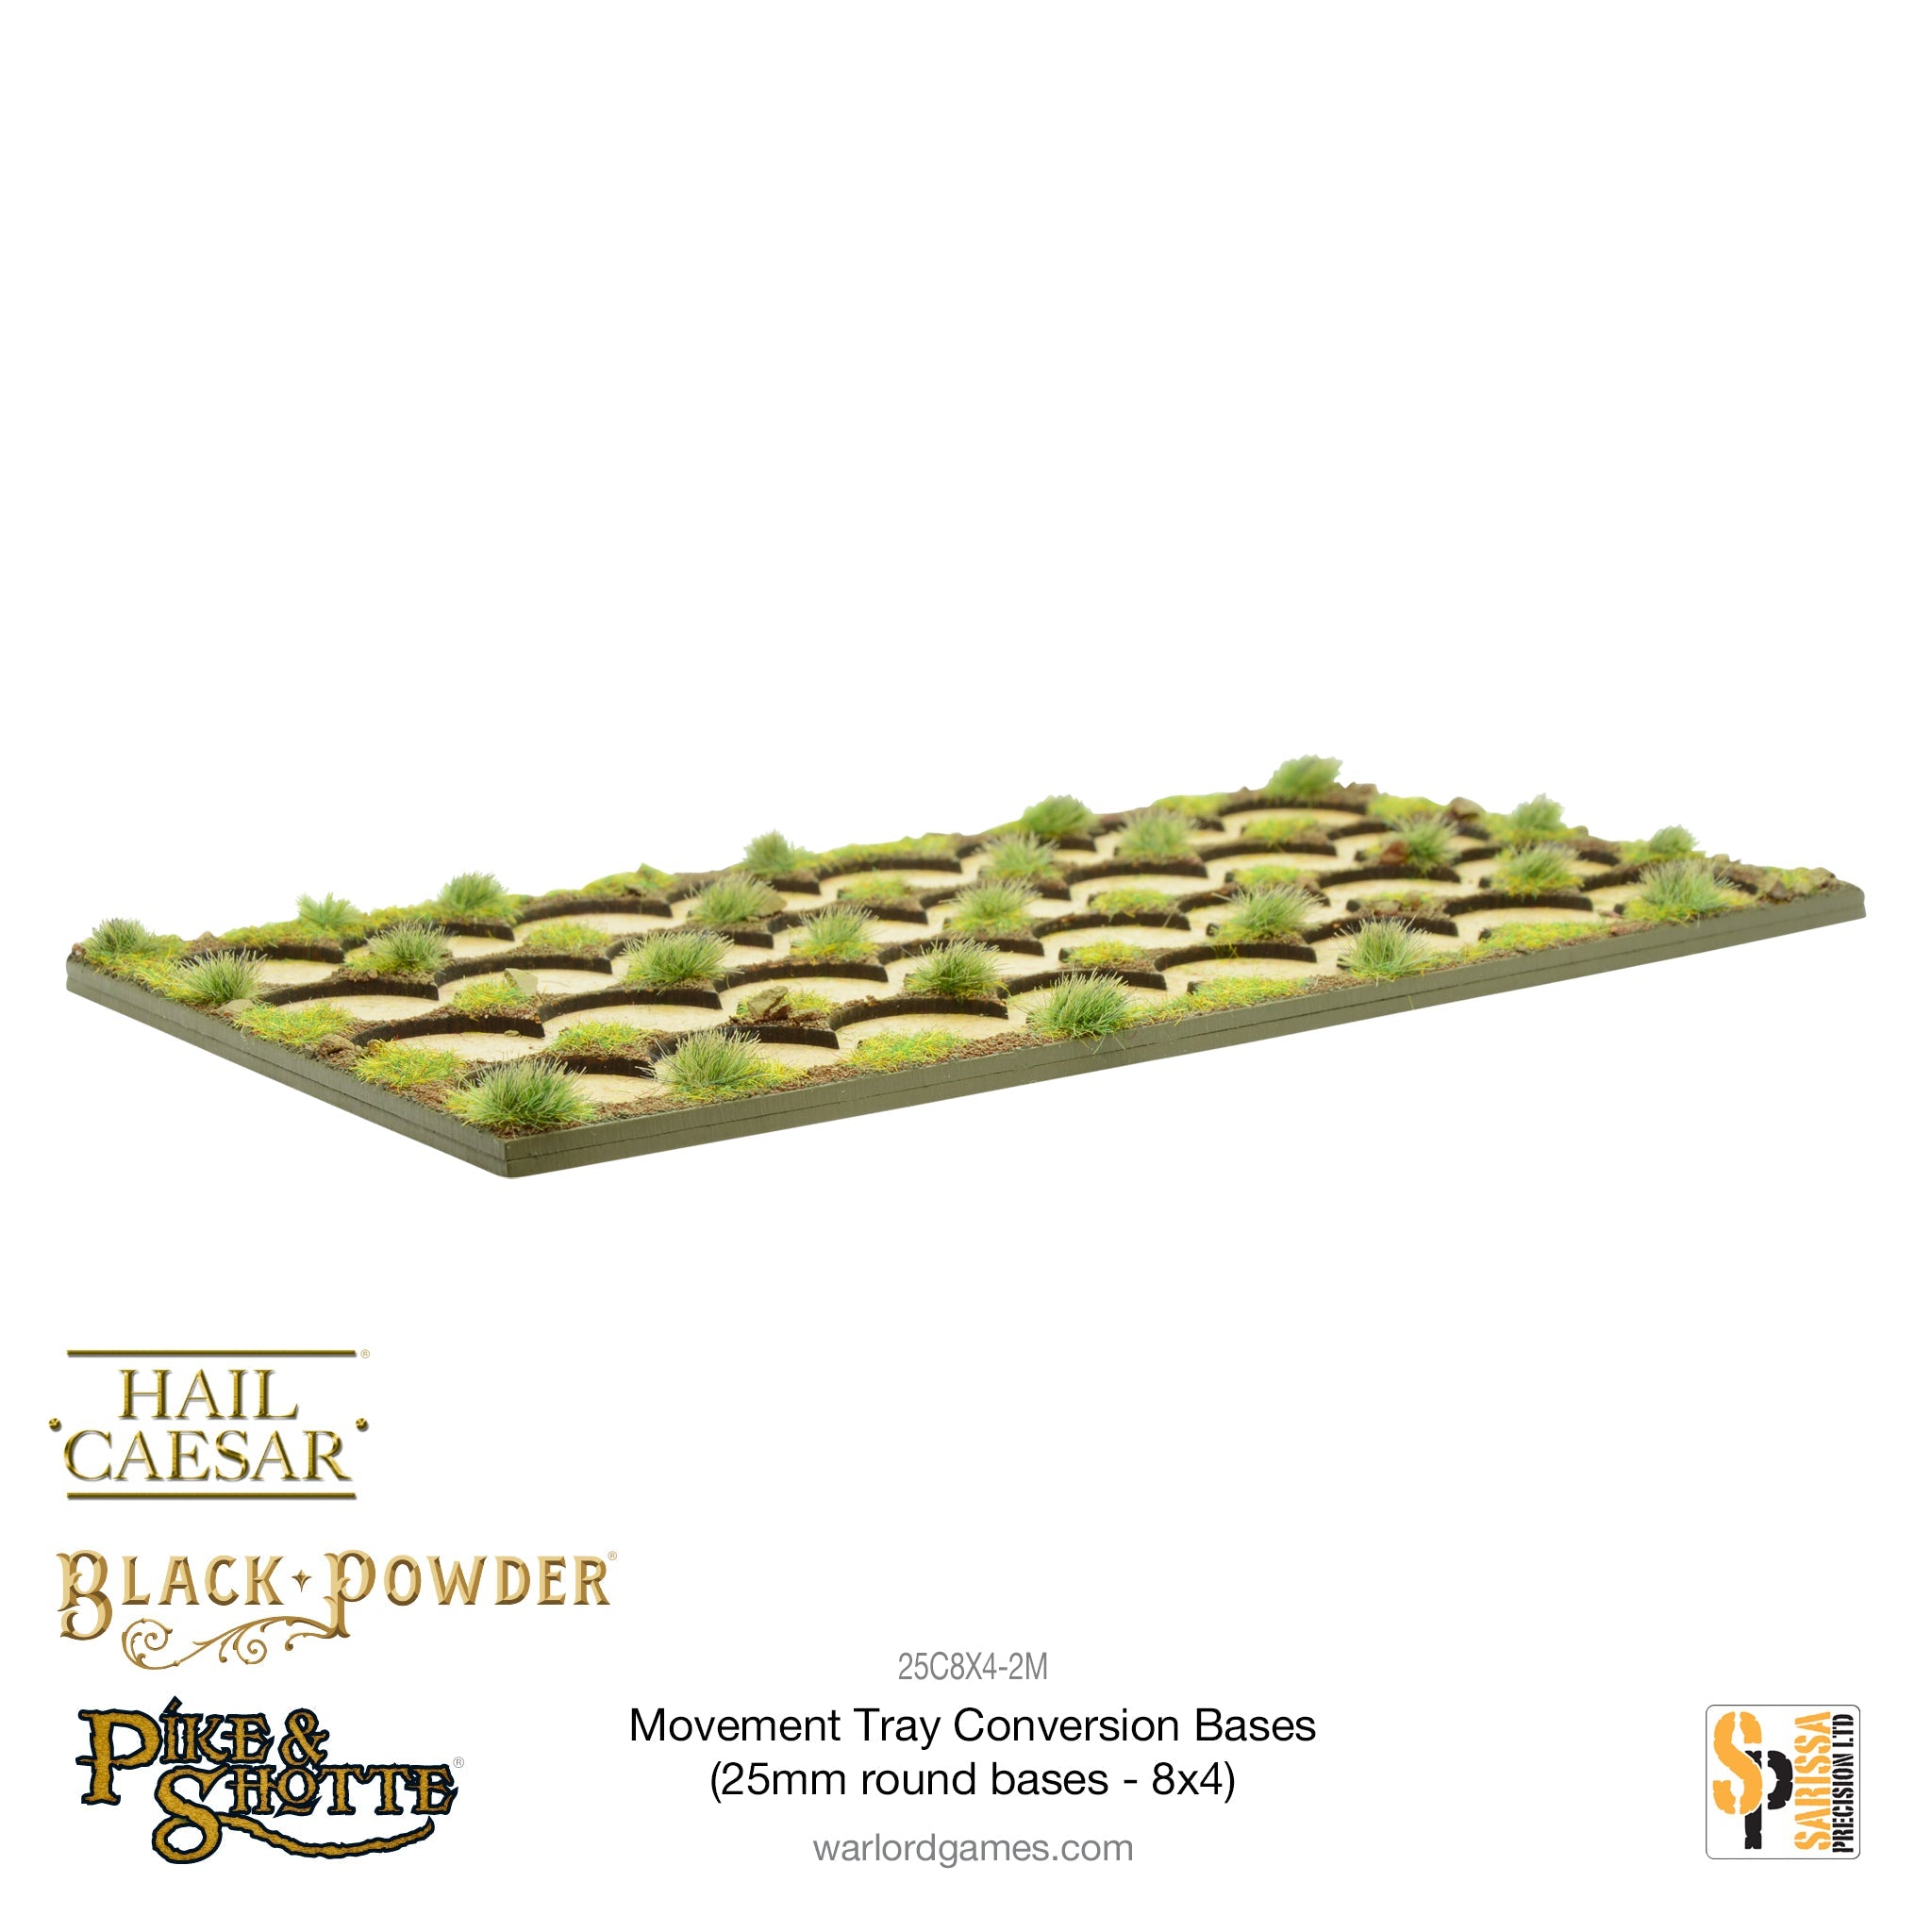 Movement Tray Conversion Bases (25mm round bases - 8x4)